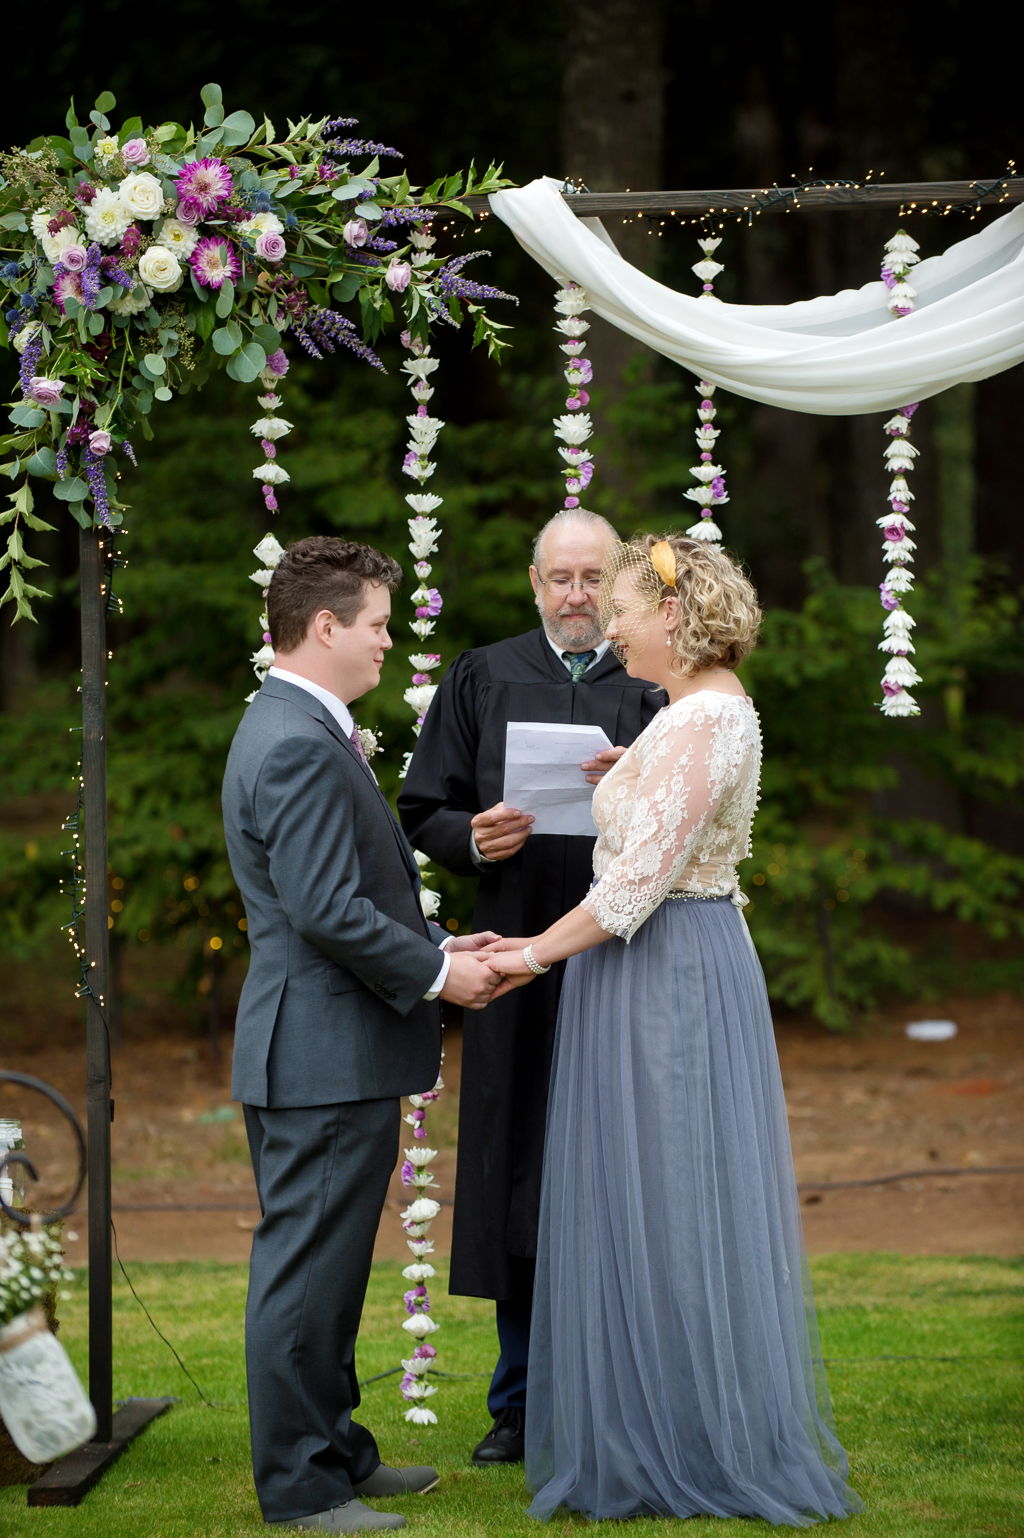 a bride and groom stand in front of a wedding arbor strung with white and ivory flowers